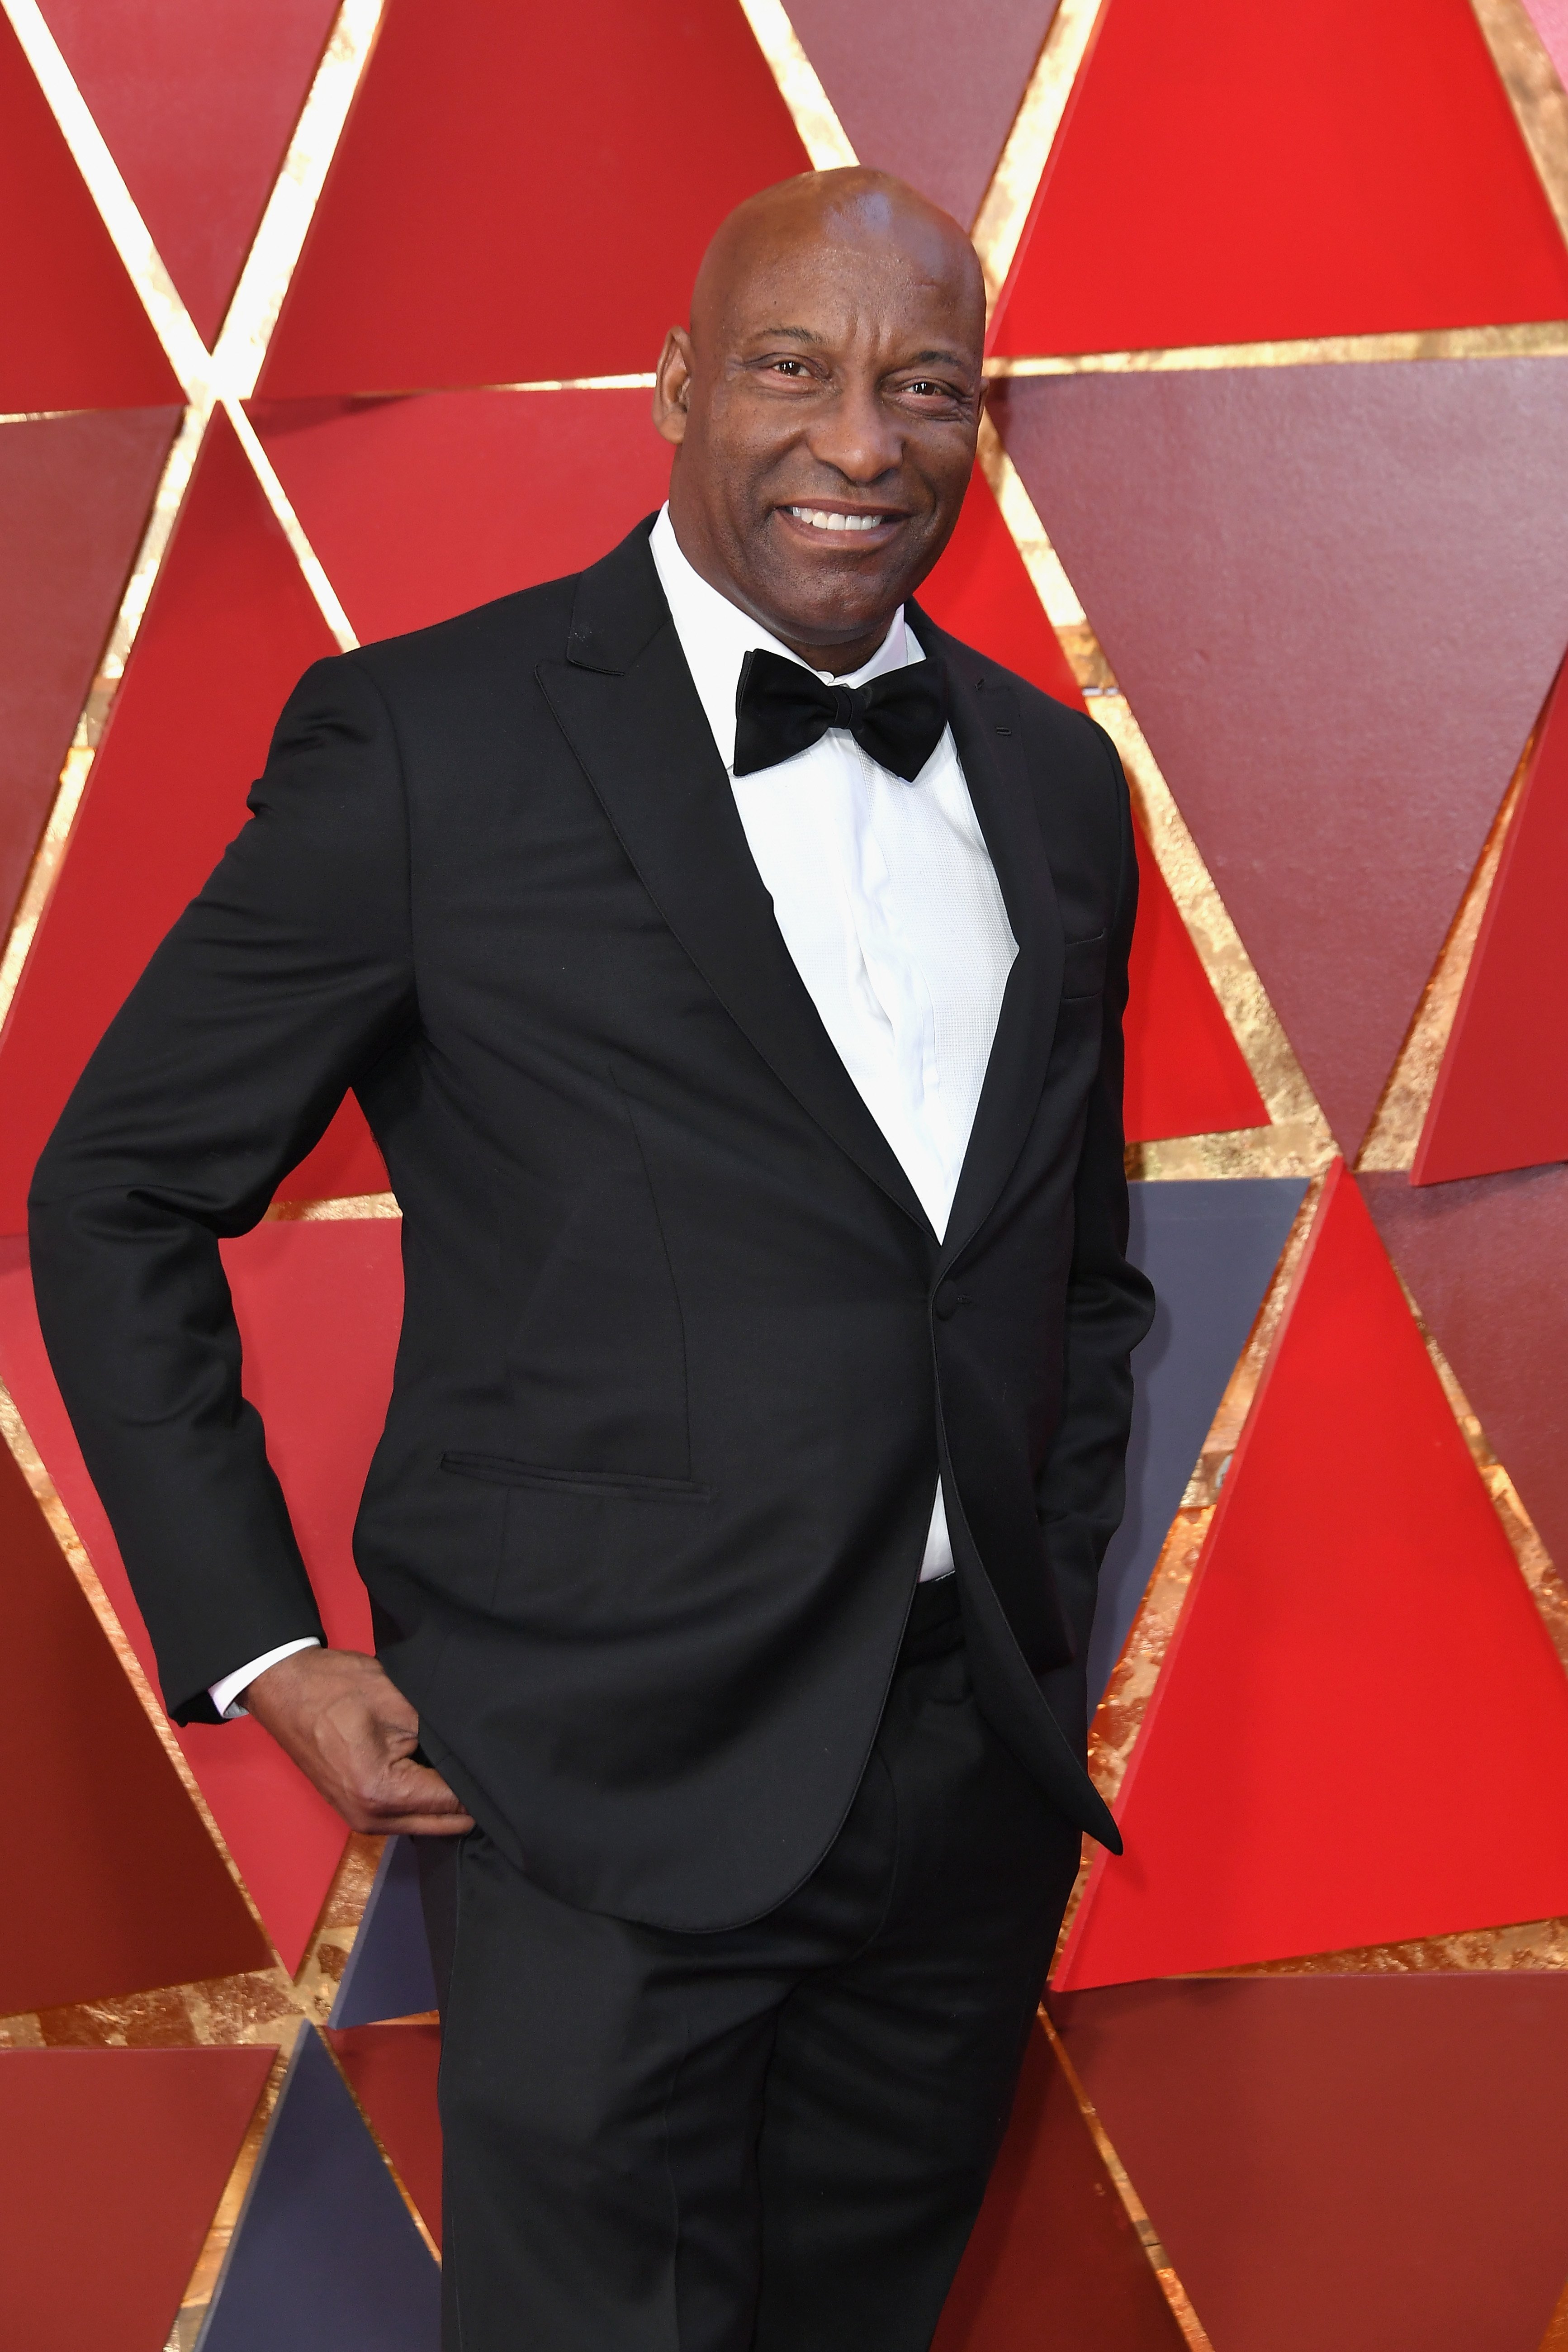 John Singleton at the 90th Annual Academy Awards on March 4, 2018 in California | Photo: Getty Images